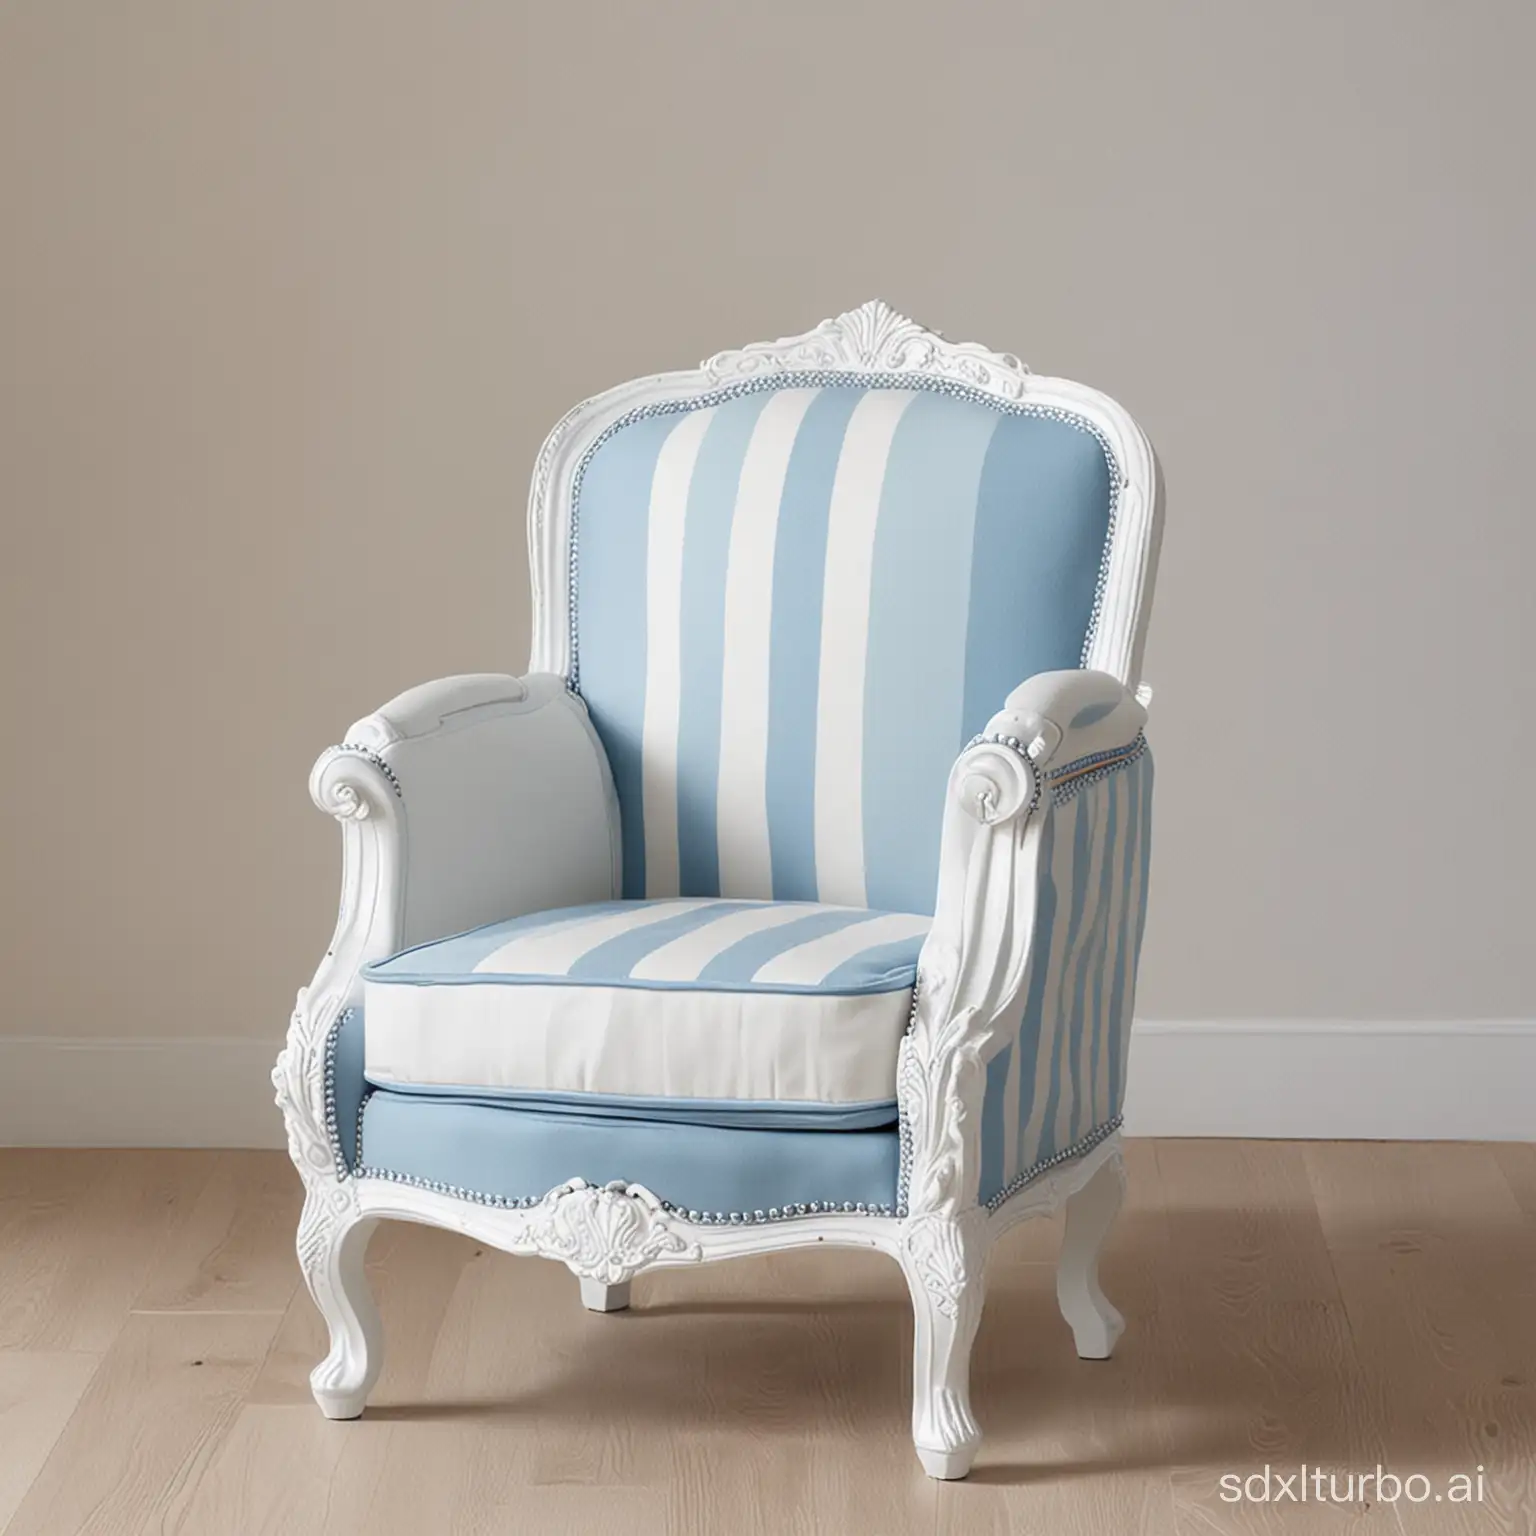 Elegant-Blue-and-White-Childrens-Chair-Charming-Addition-to-Playrooms